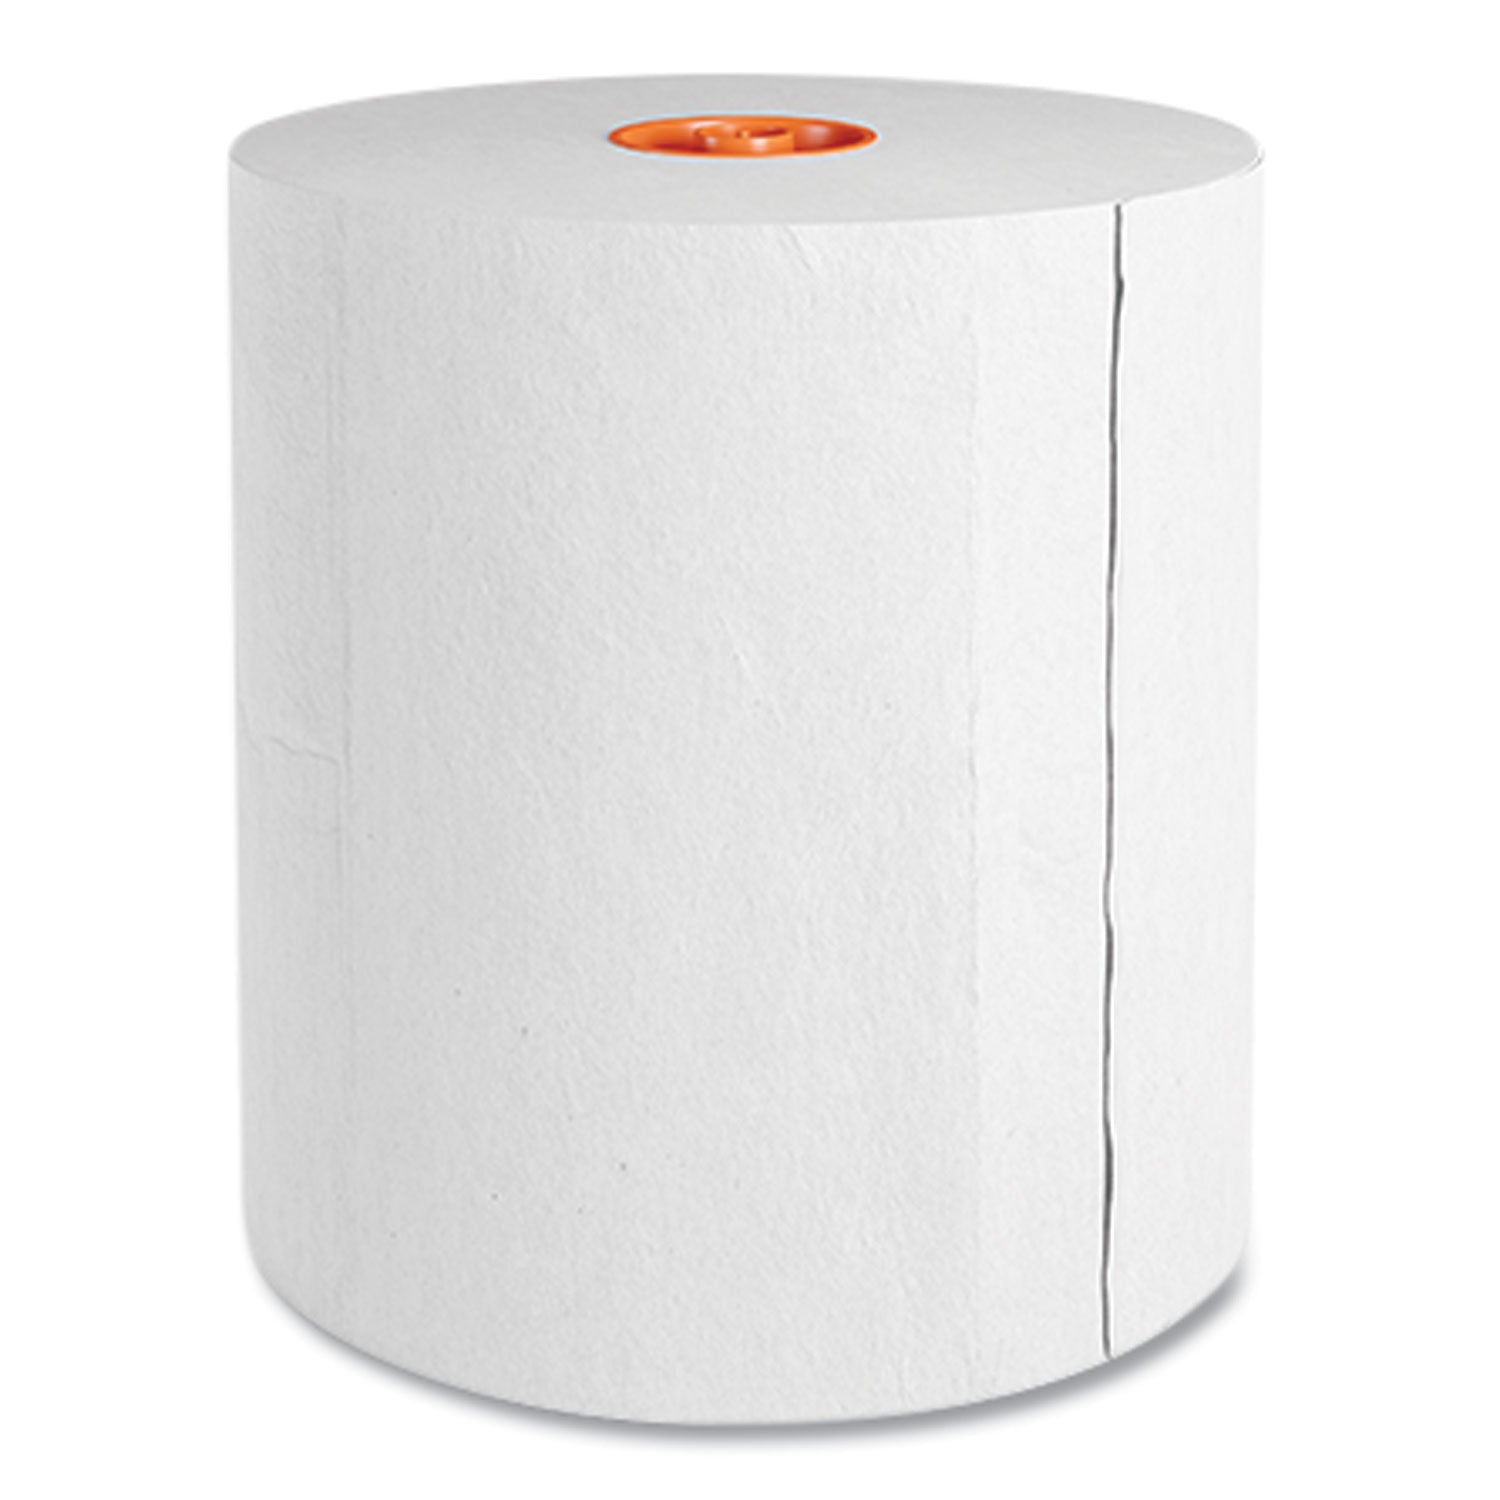 recycled-j-series-hardwound-paper-towels-1-ply-8-x-800-ft-white-6-rolls-carton_cwz24405977 - 3